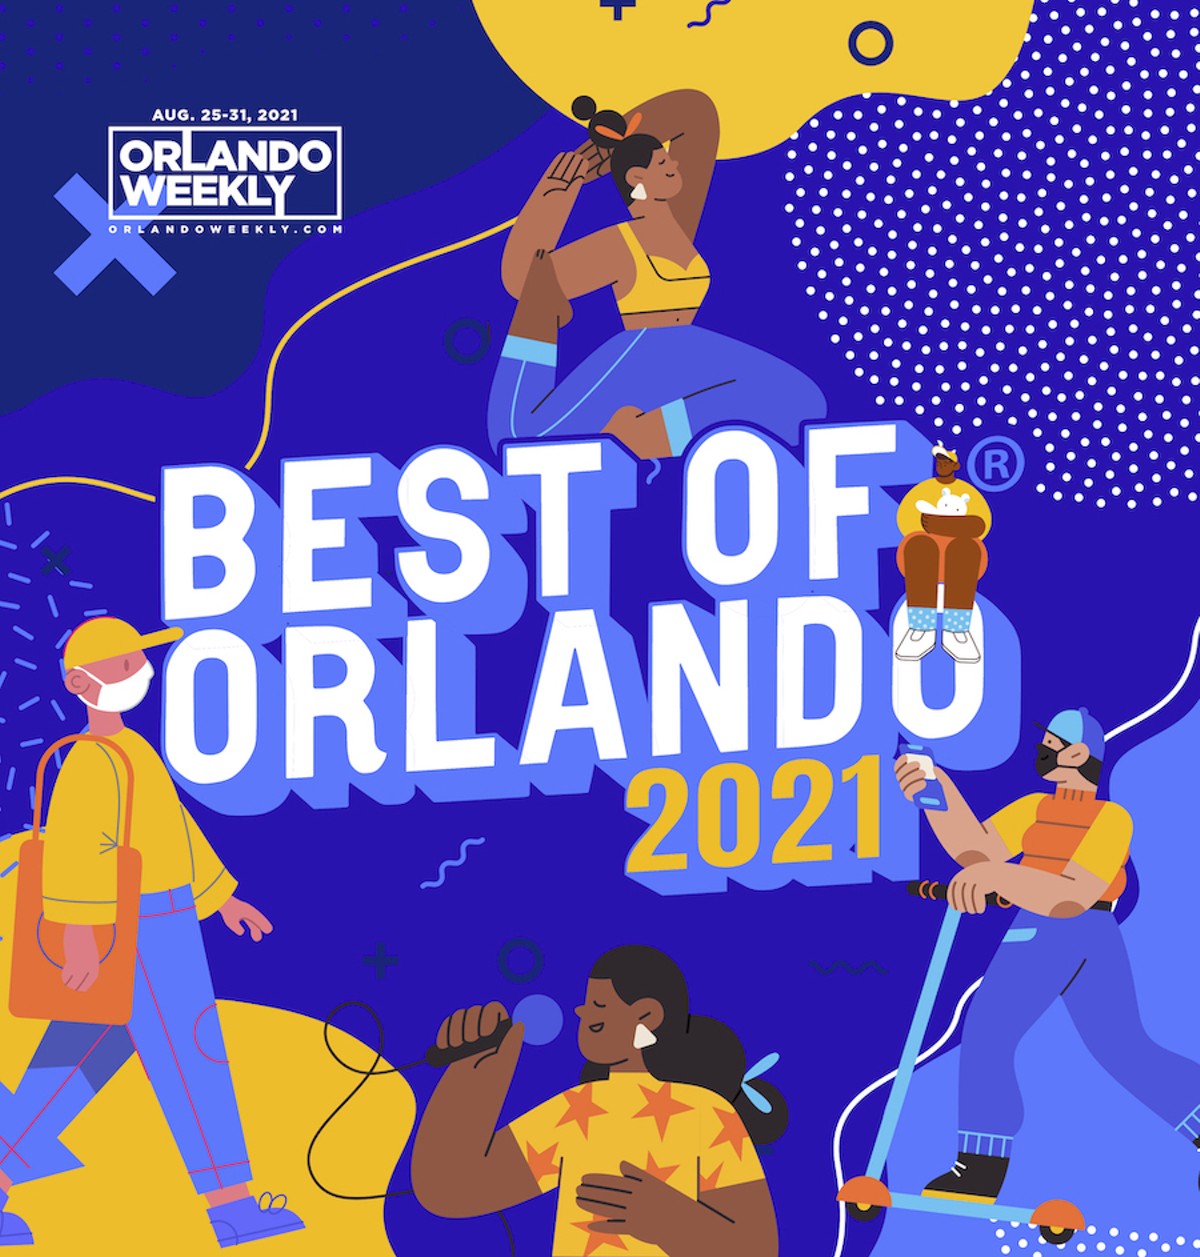 Welcome to the Best of Orlando® 2021